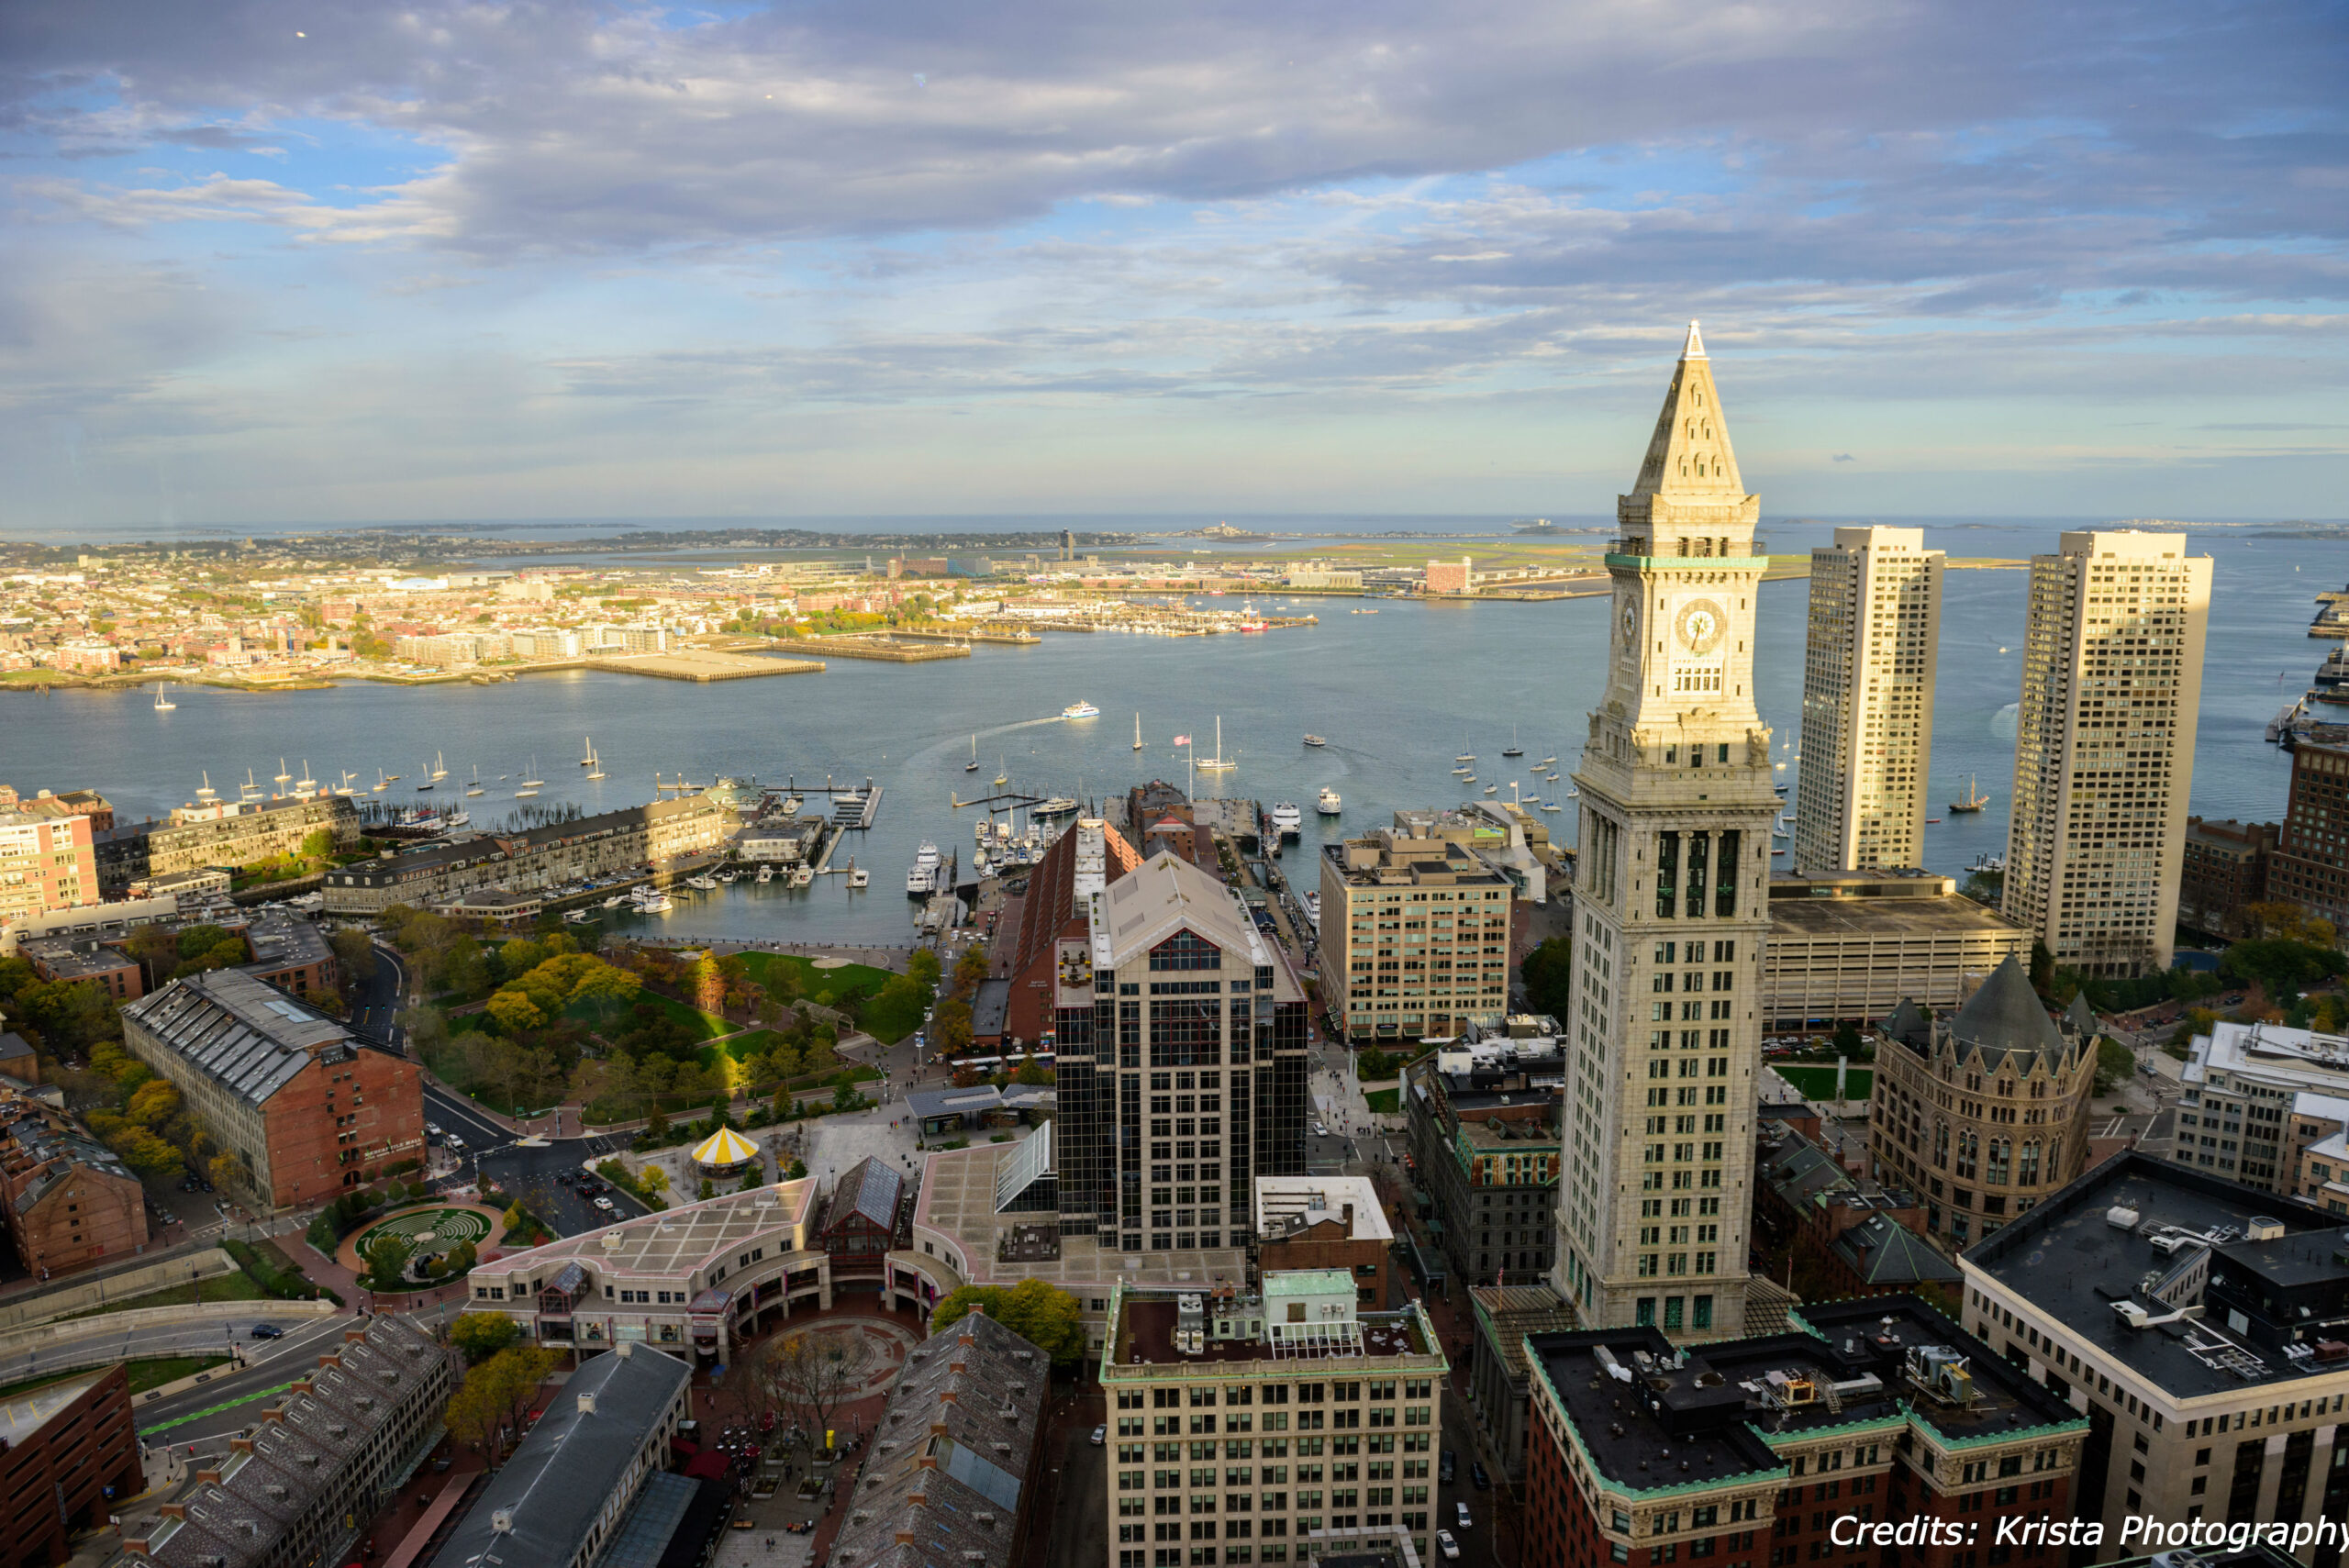 A view of the Boston Harbor